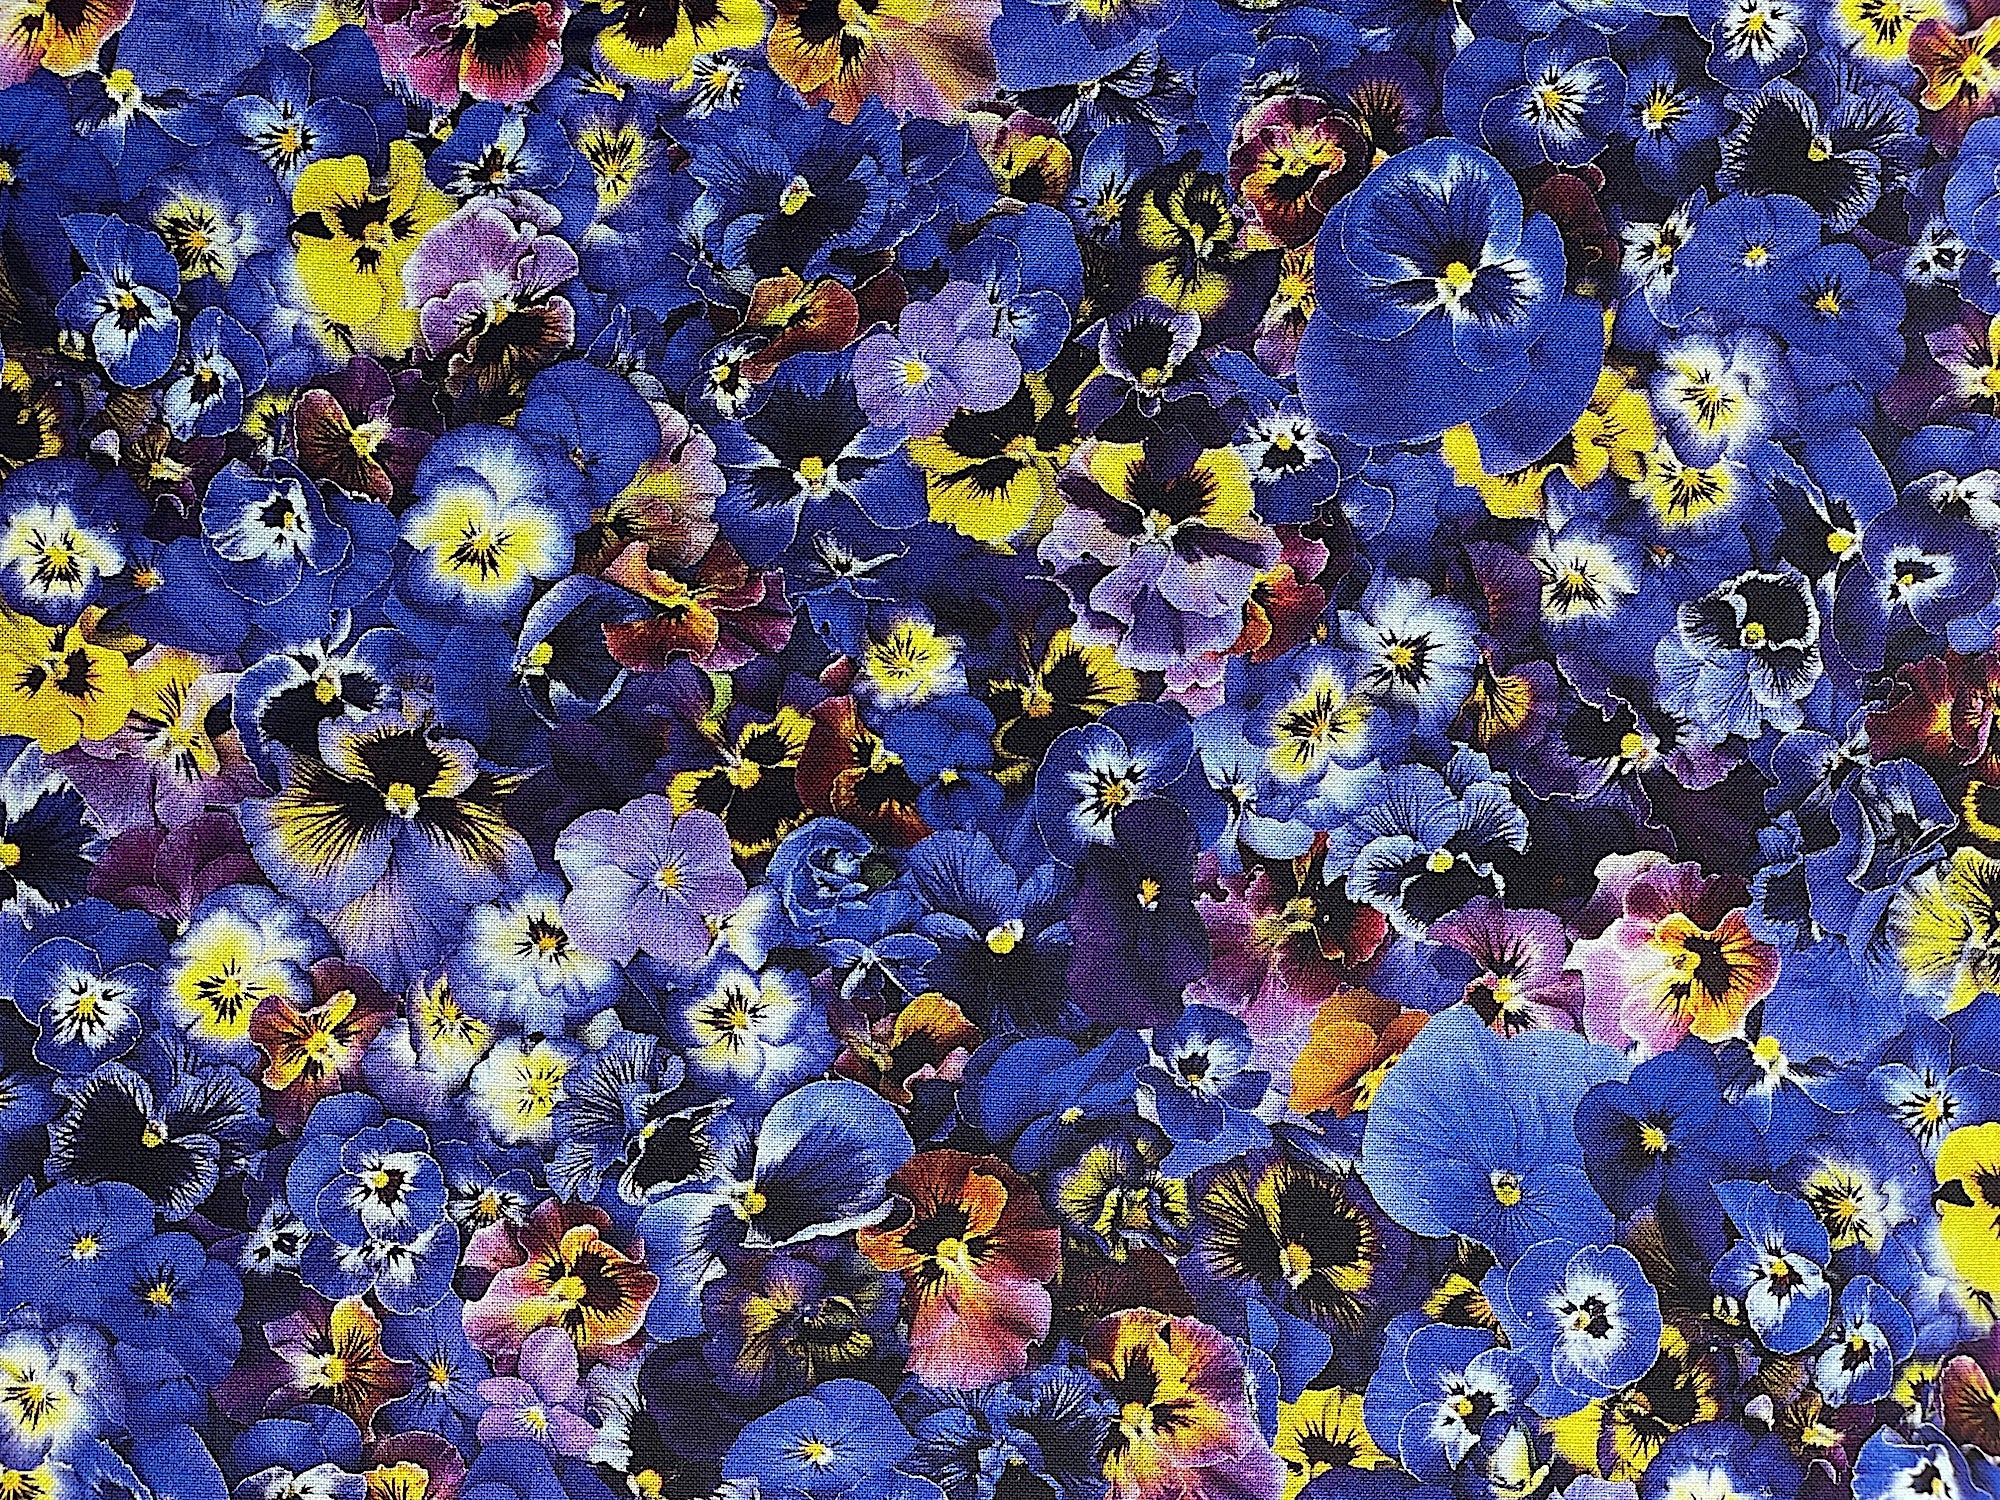 This fabric is part of the Hand Picked collection by Maywood Studio. You will find purple, yellow and white pansies packed in this cotton fabric